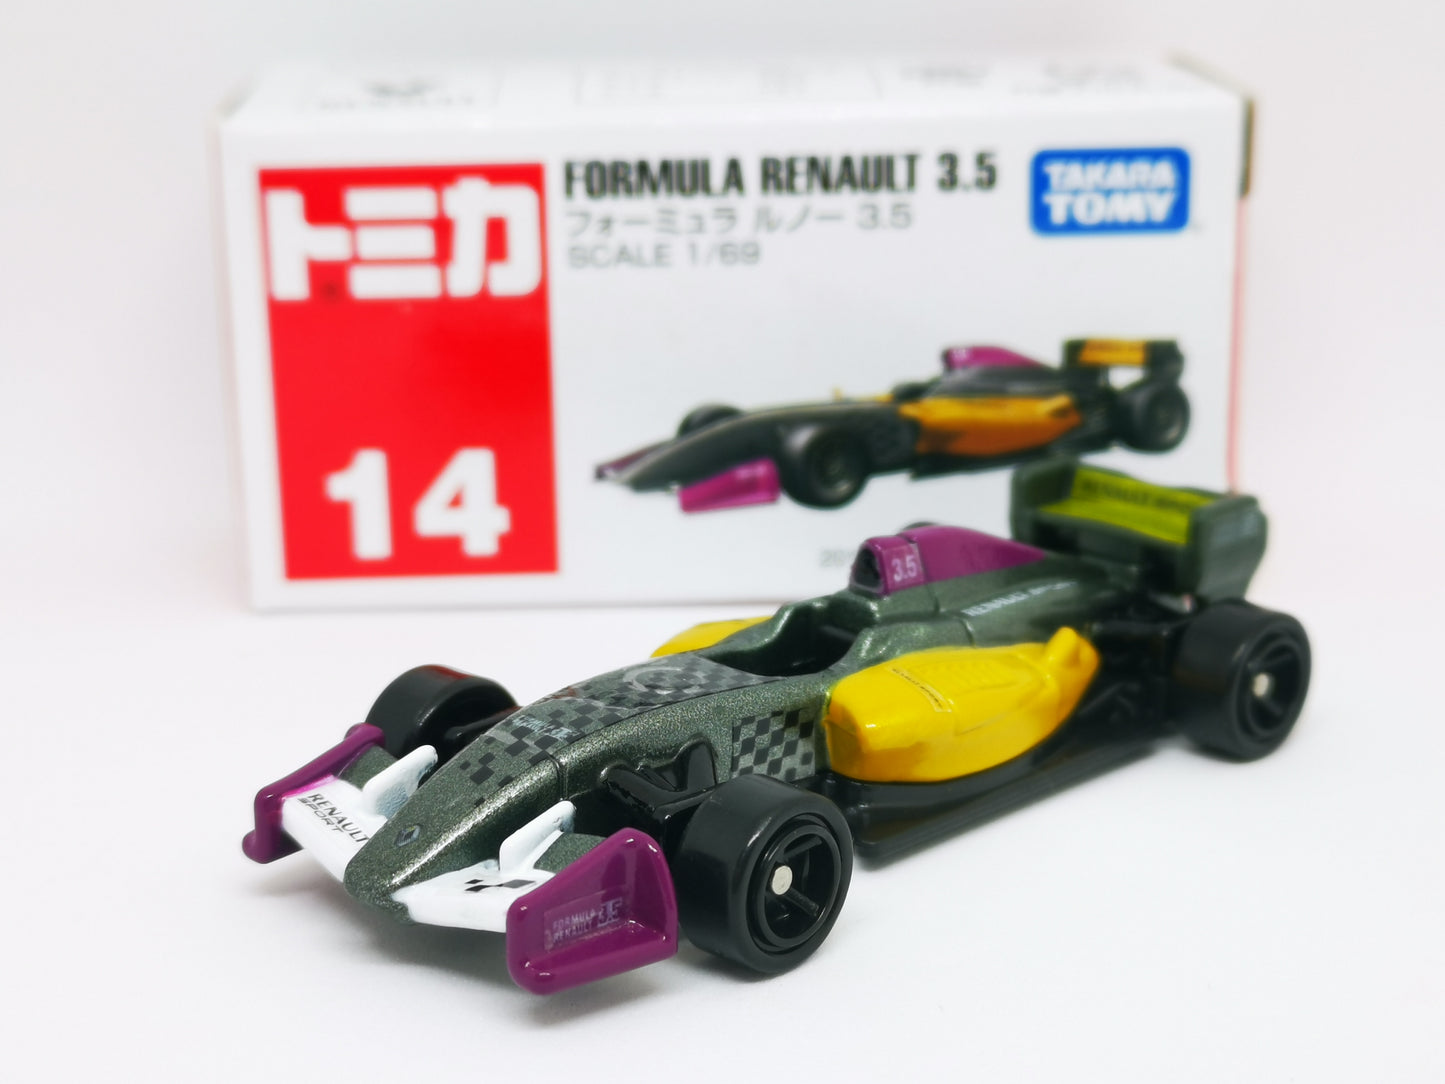 Tomica #14 Formula Renault 3.5 1/69 SCALE Set of Two